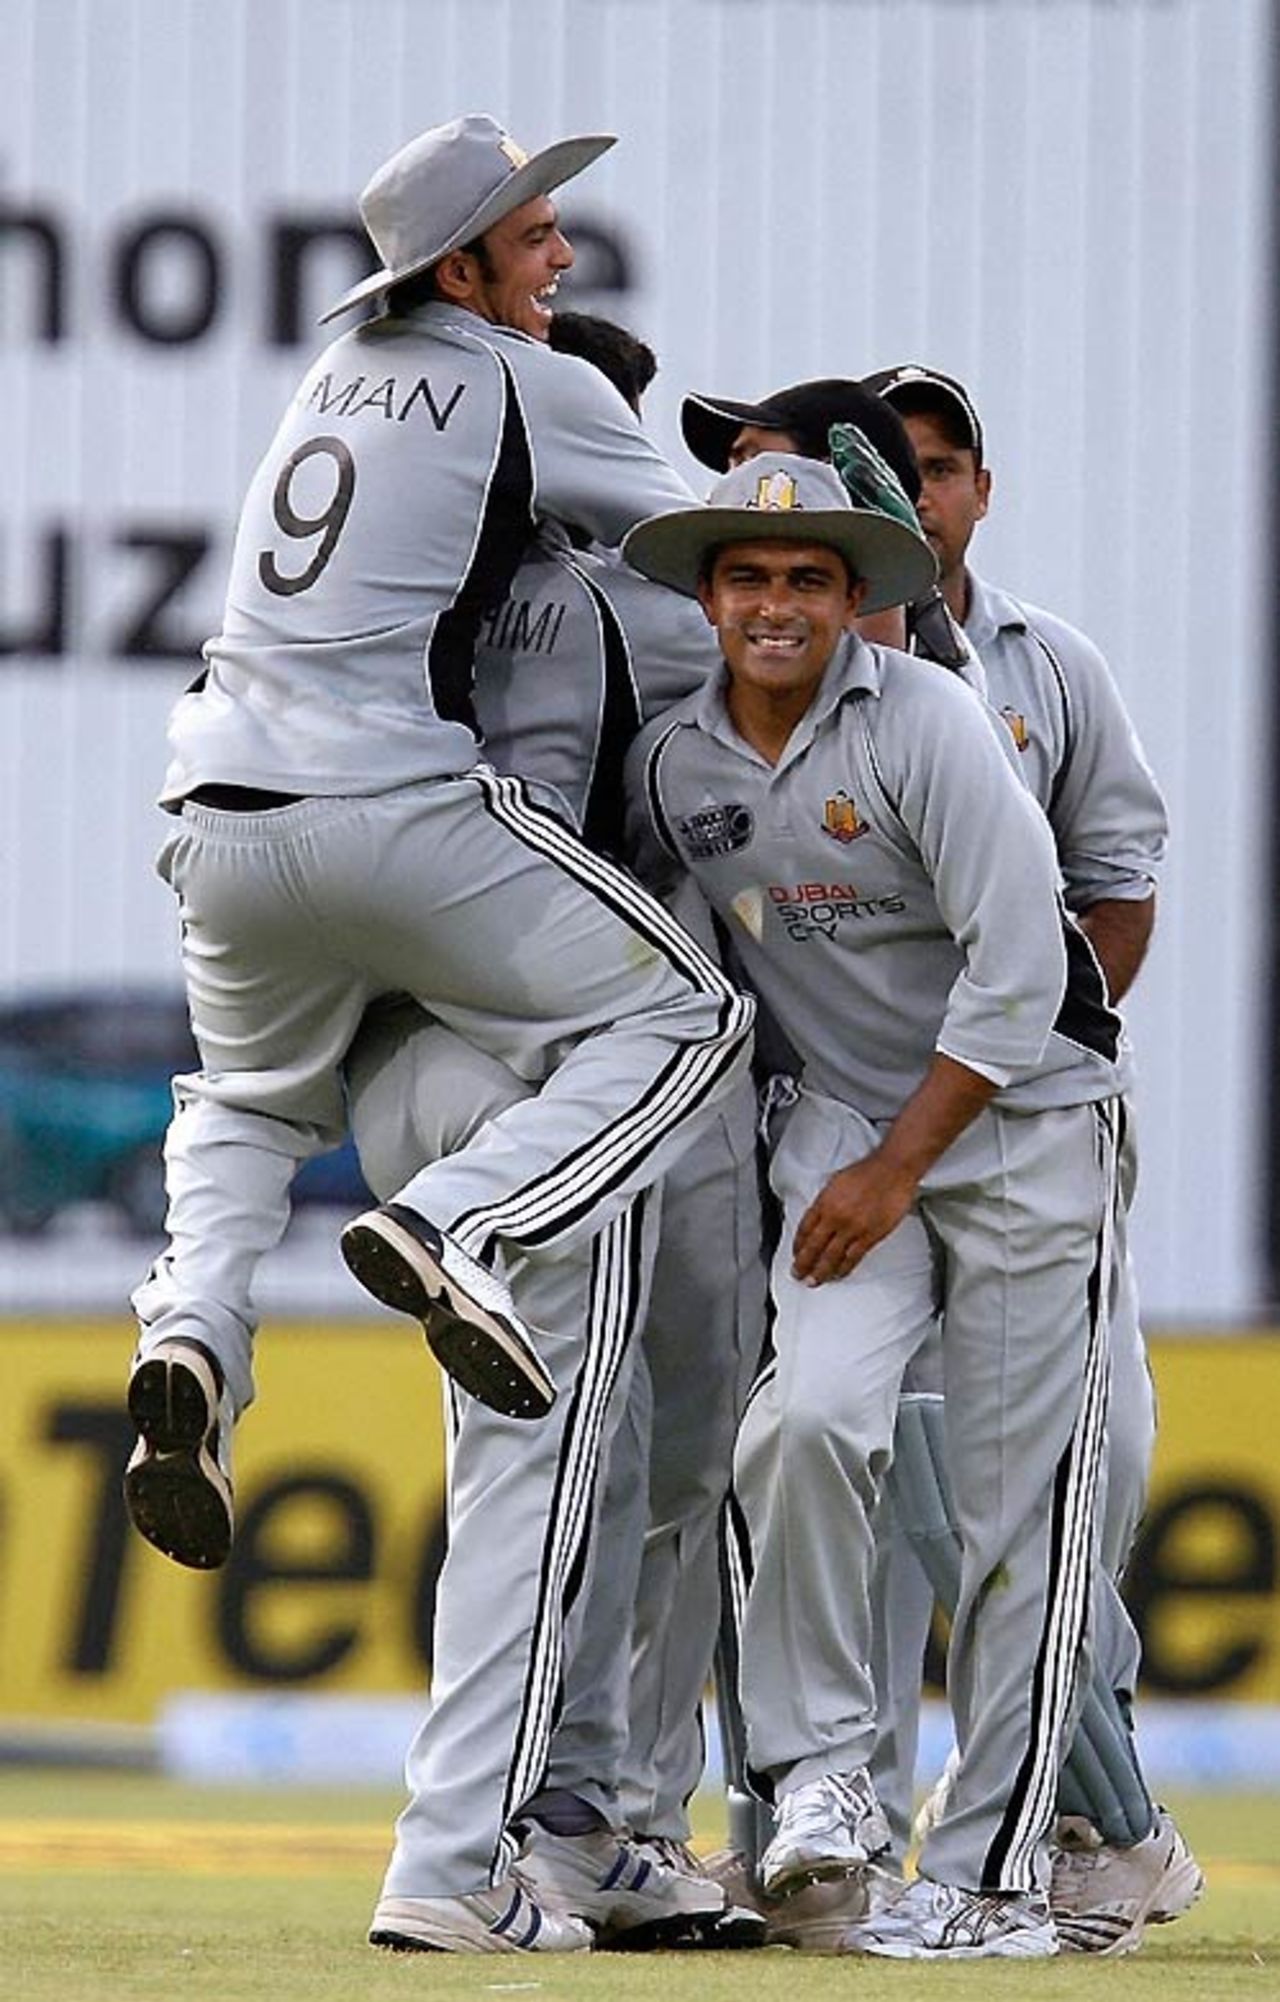 UAE are ecstatic after getting another breakthrough, Sri Lanka v UAE, Group A, Asia Cup, Lahore, June 26, 2008